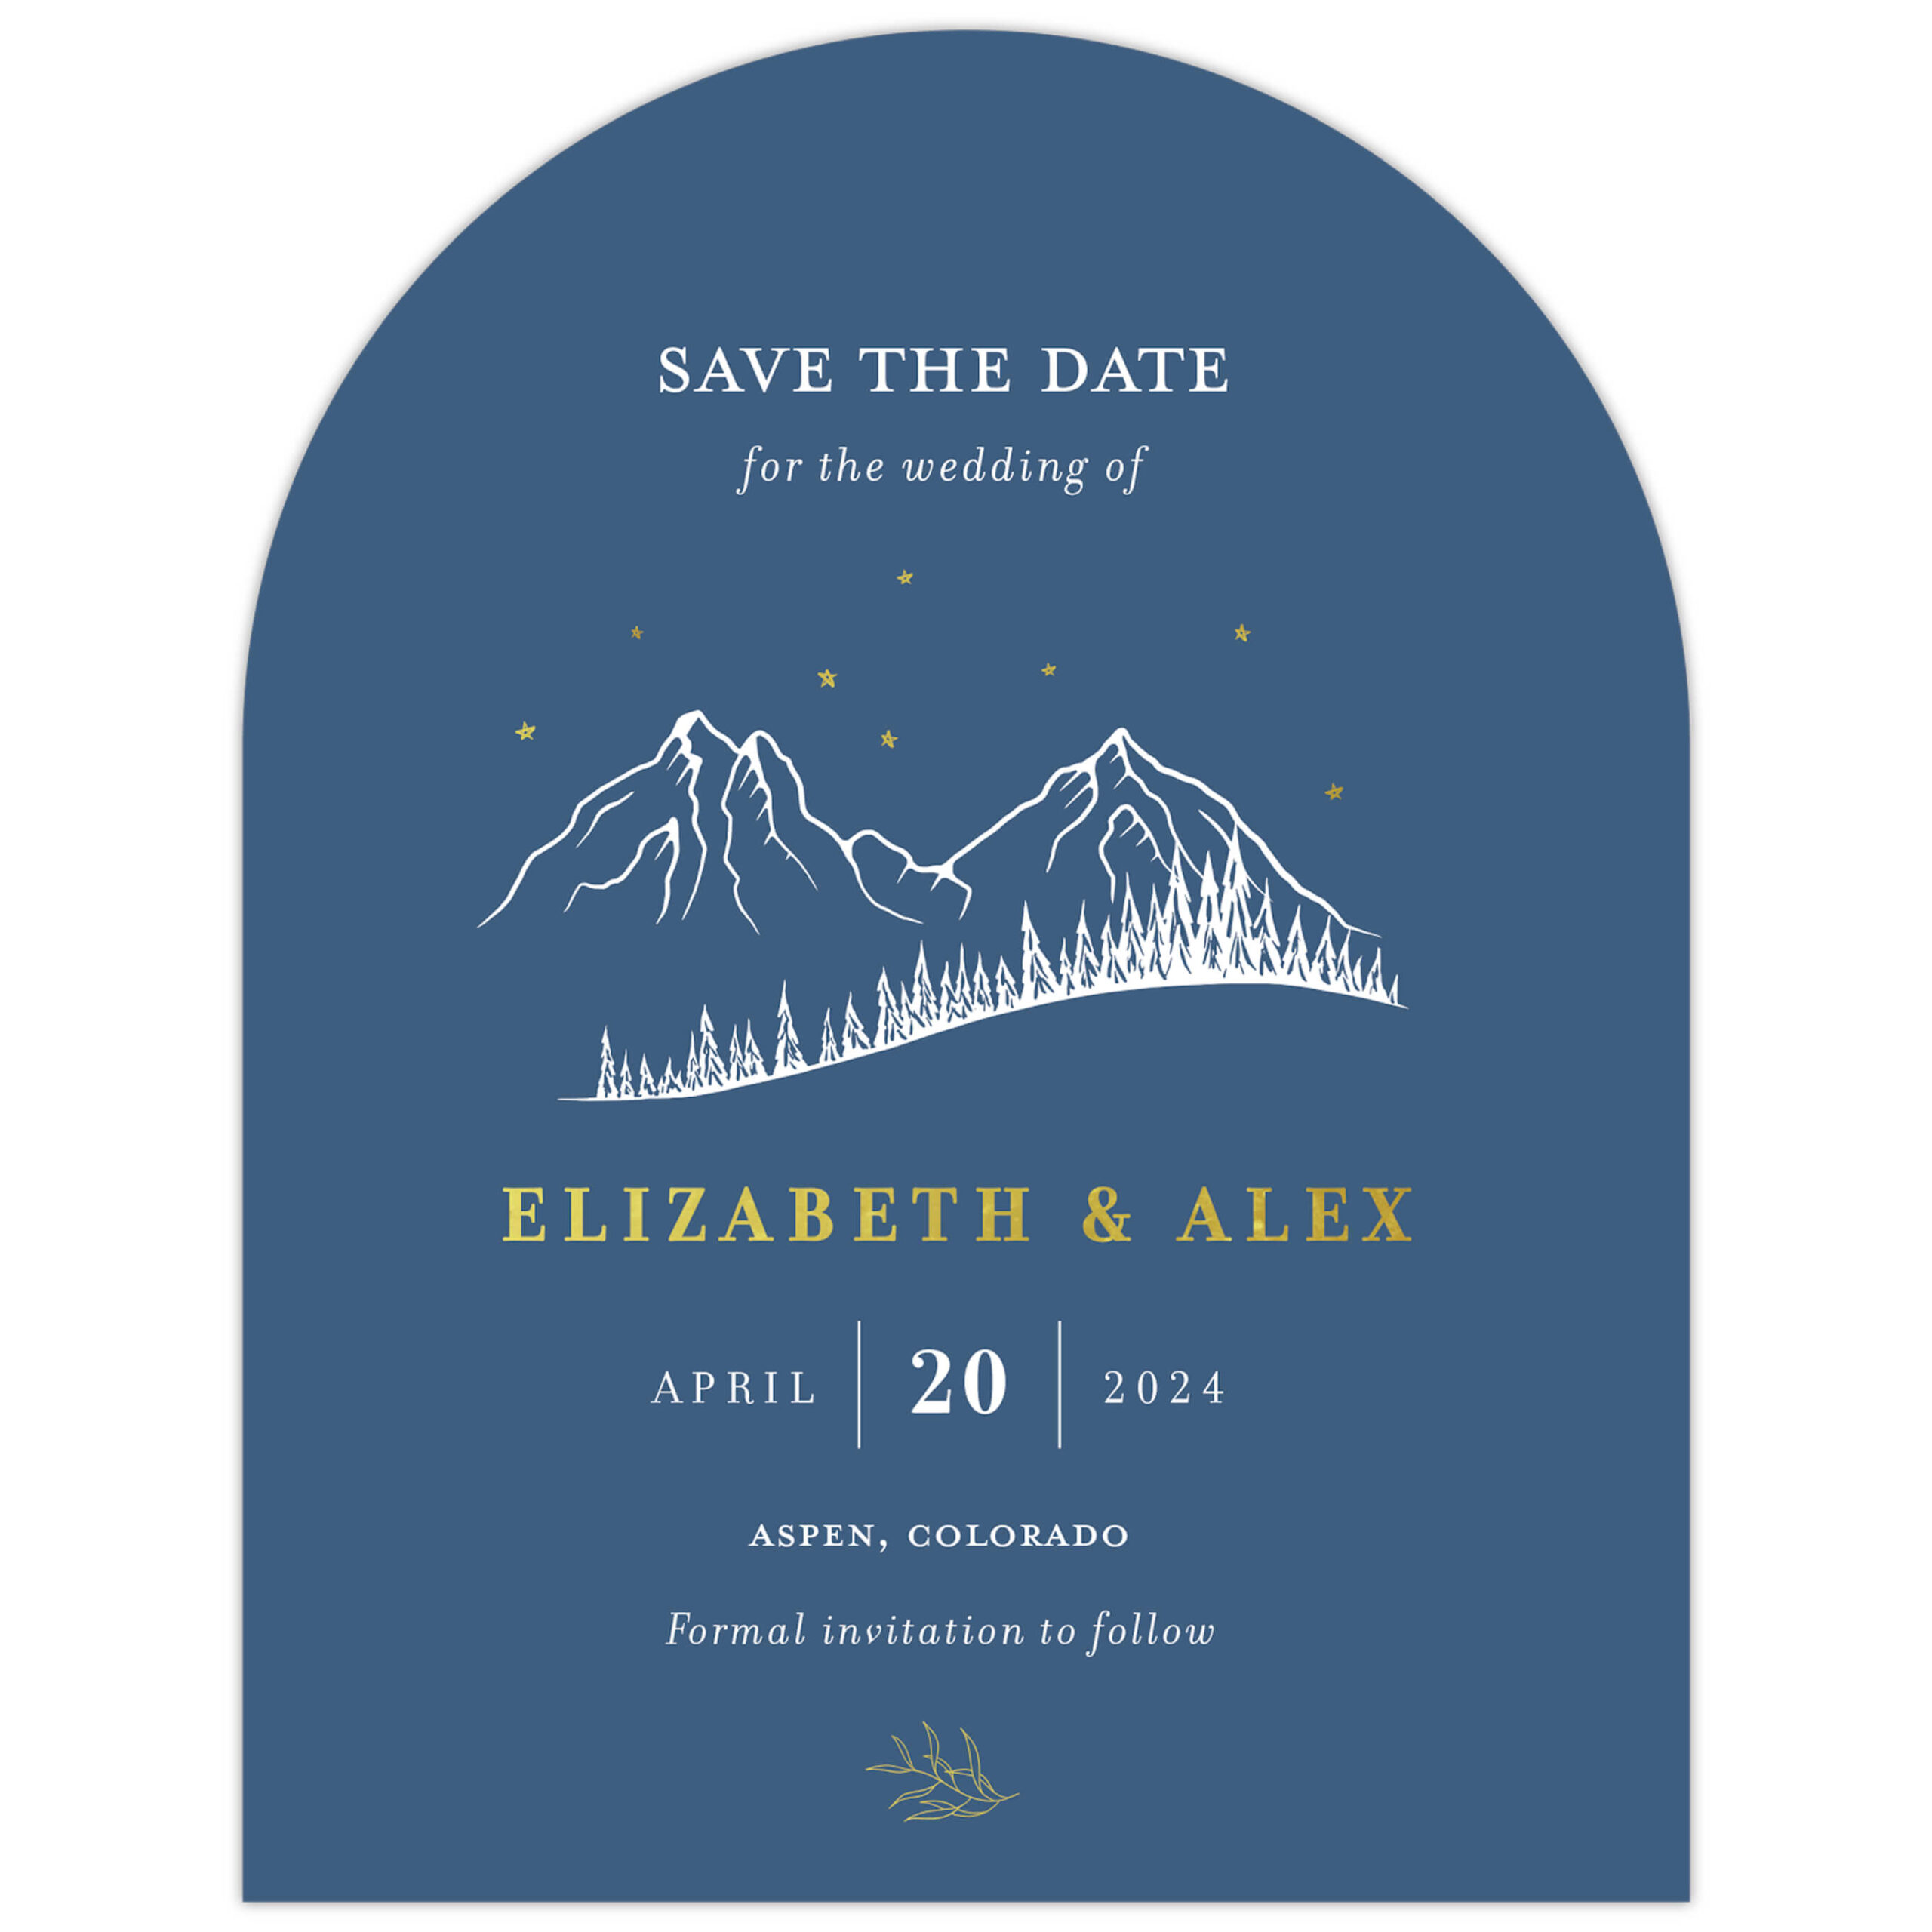 Arch die cut save the dates